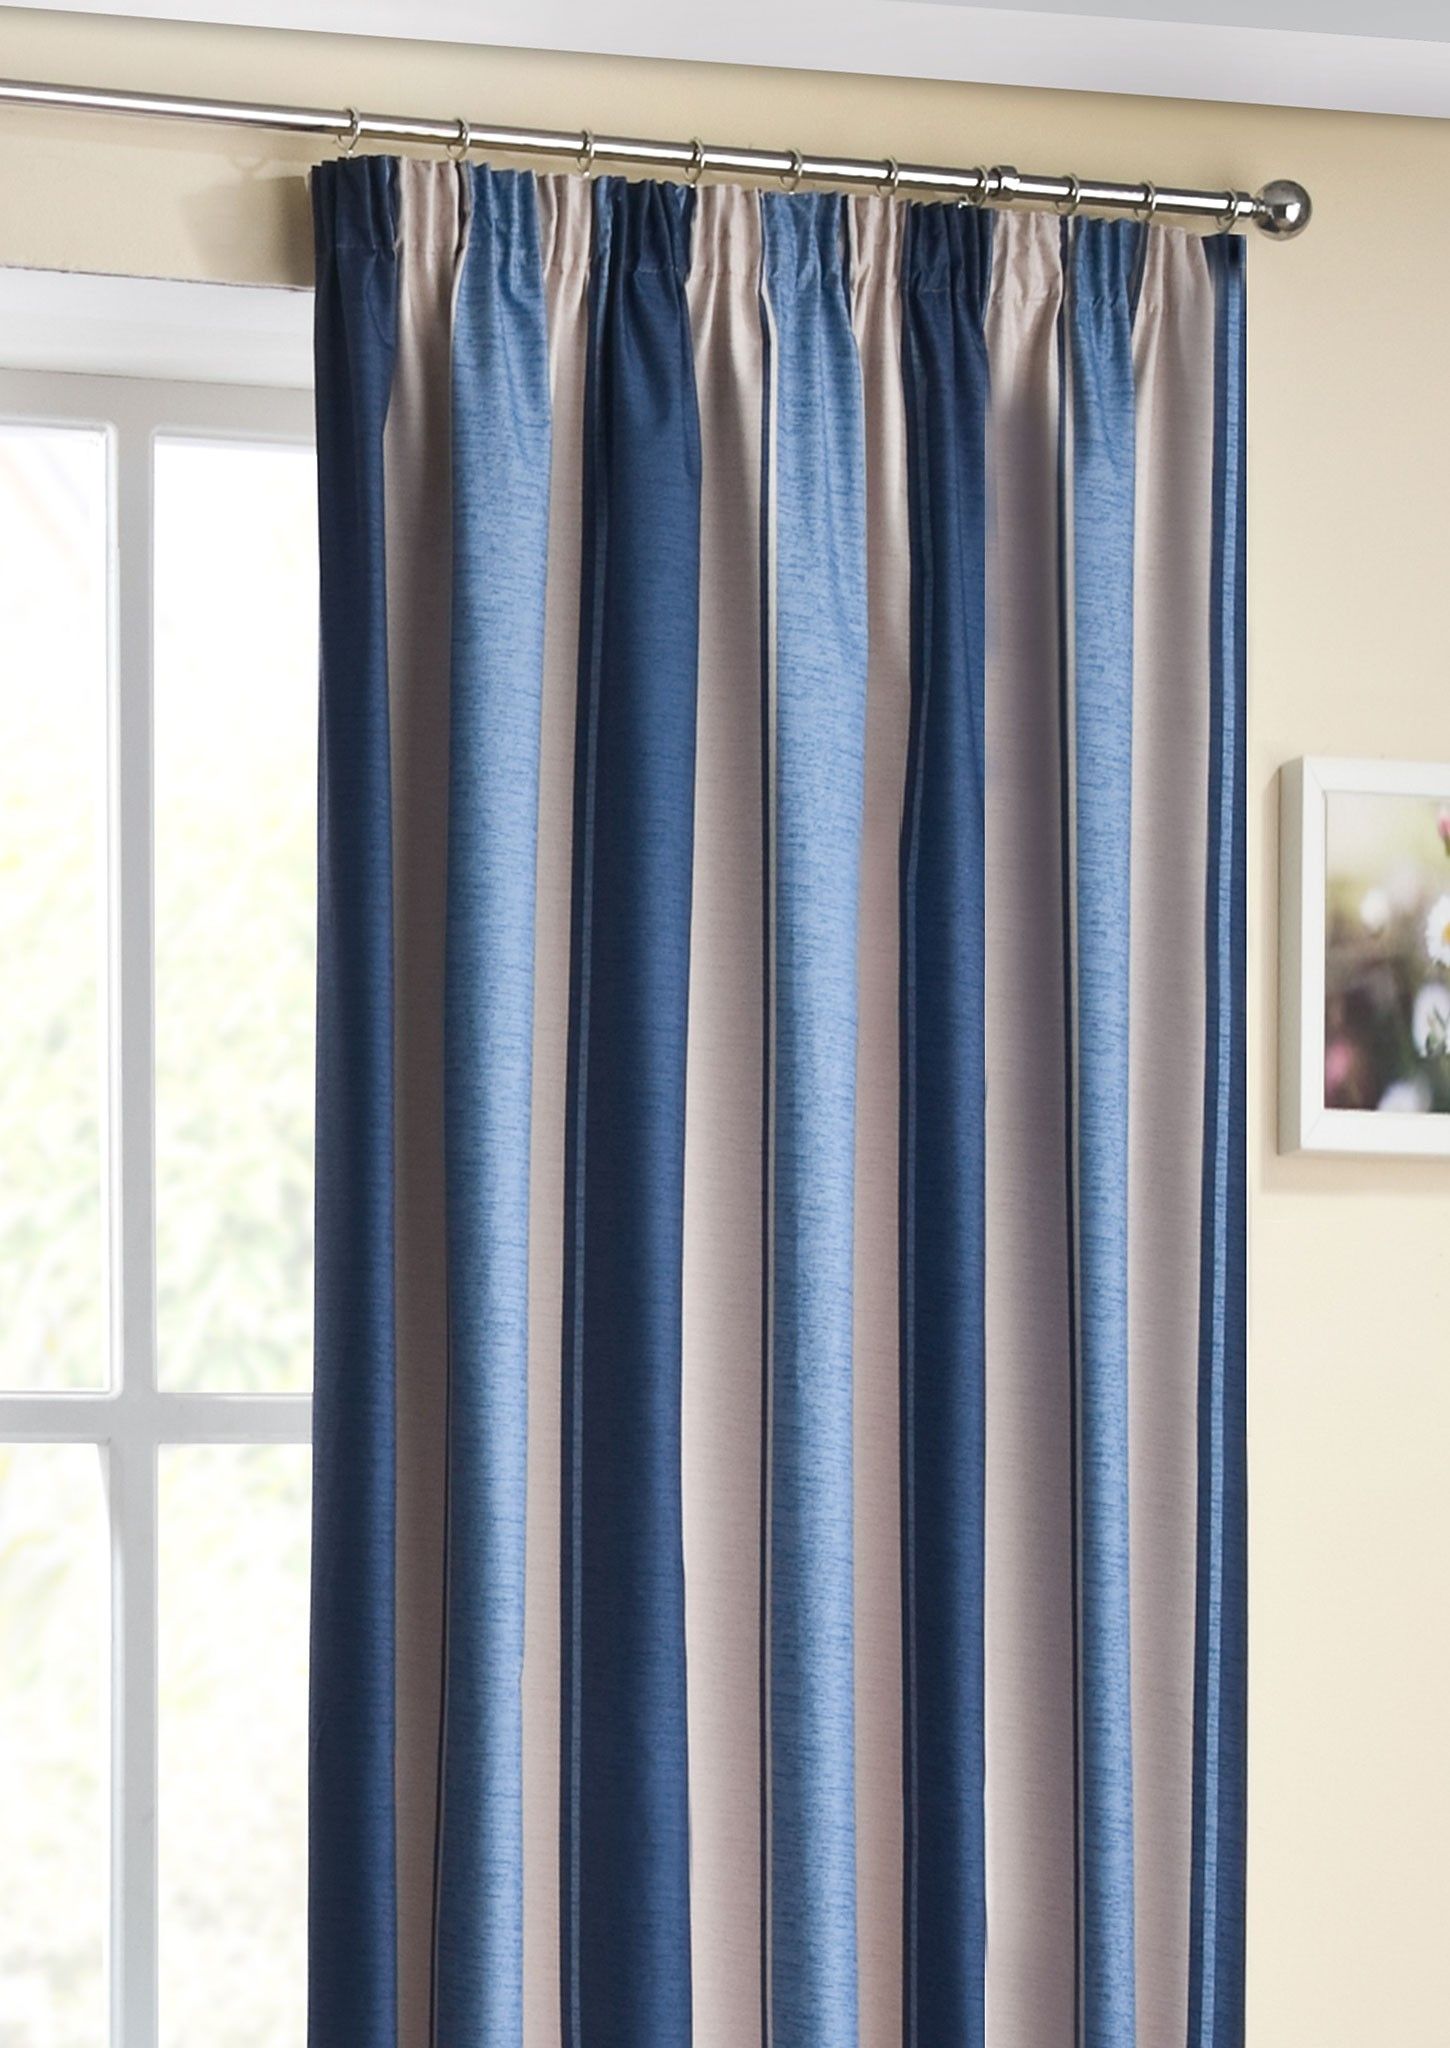 Twilight Navy Thermal Pencil Pleat Curtains Regarding Pencil Pleat Blackout Curtains (View 2 of 15)